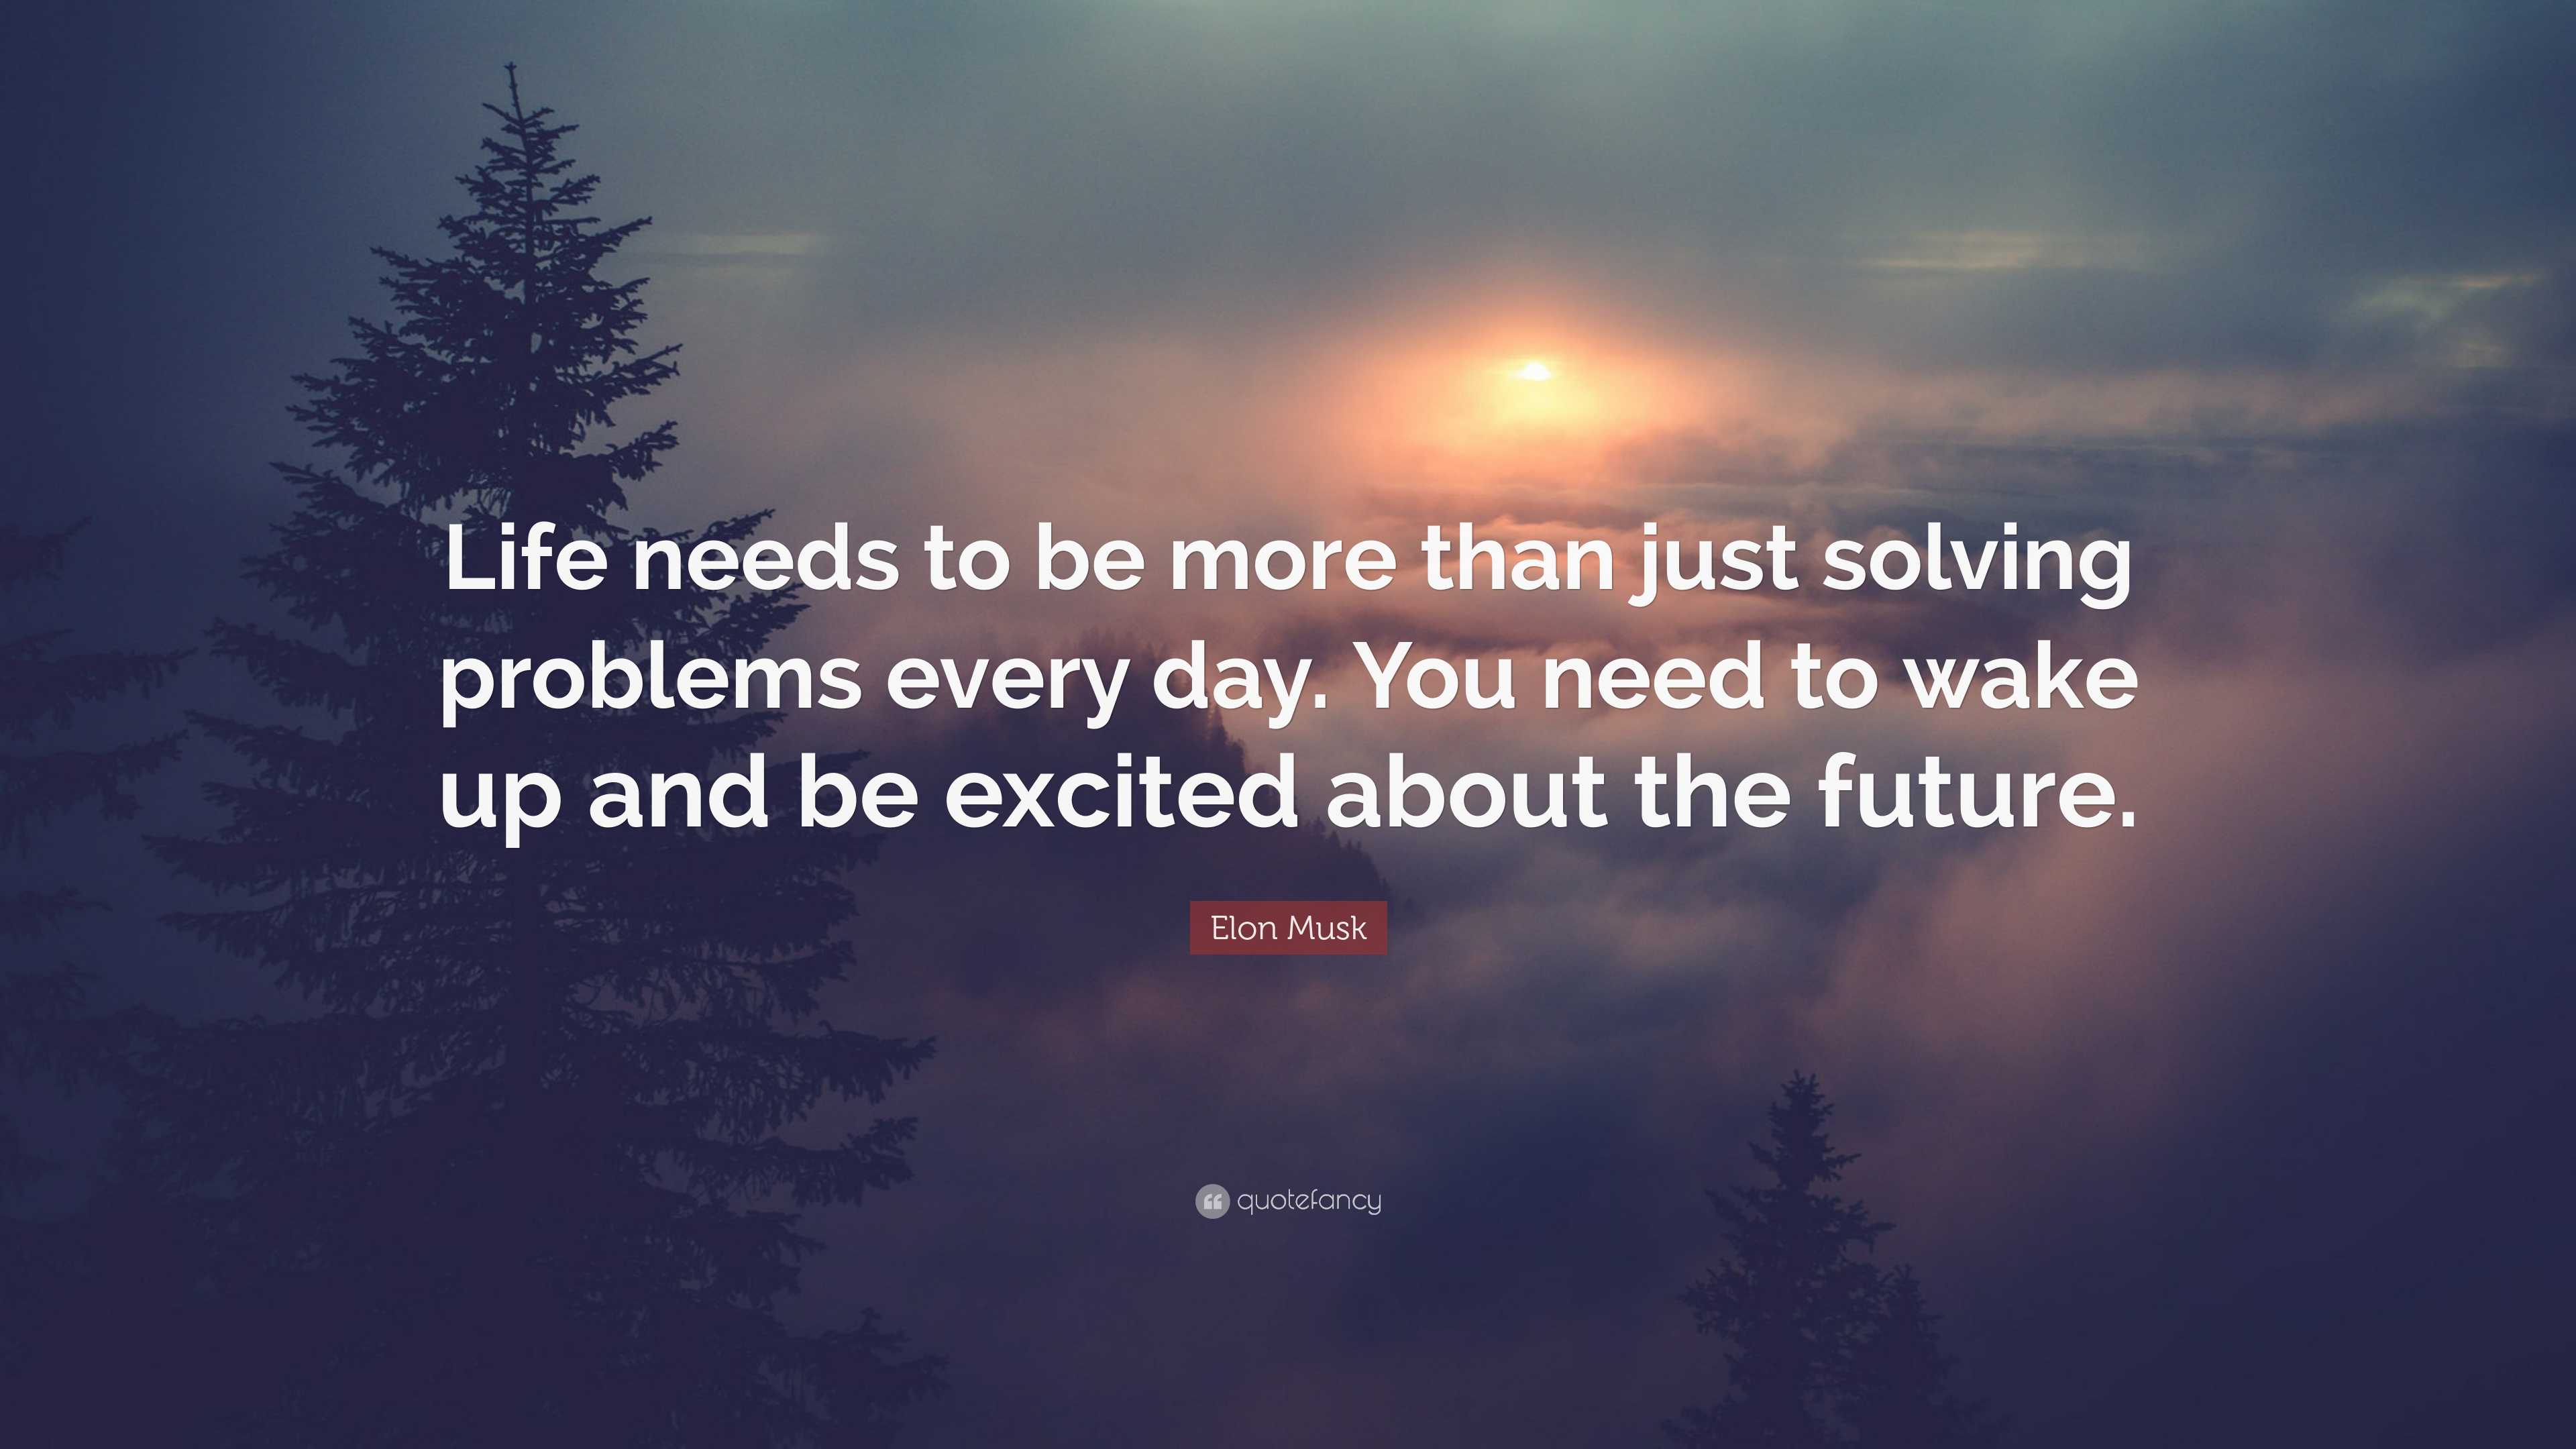 Elon Musk Quote: “Life needs to be more than just solving problems ...